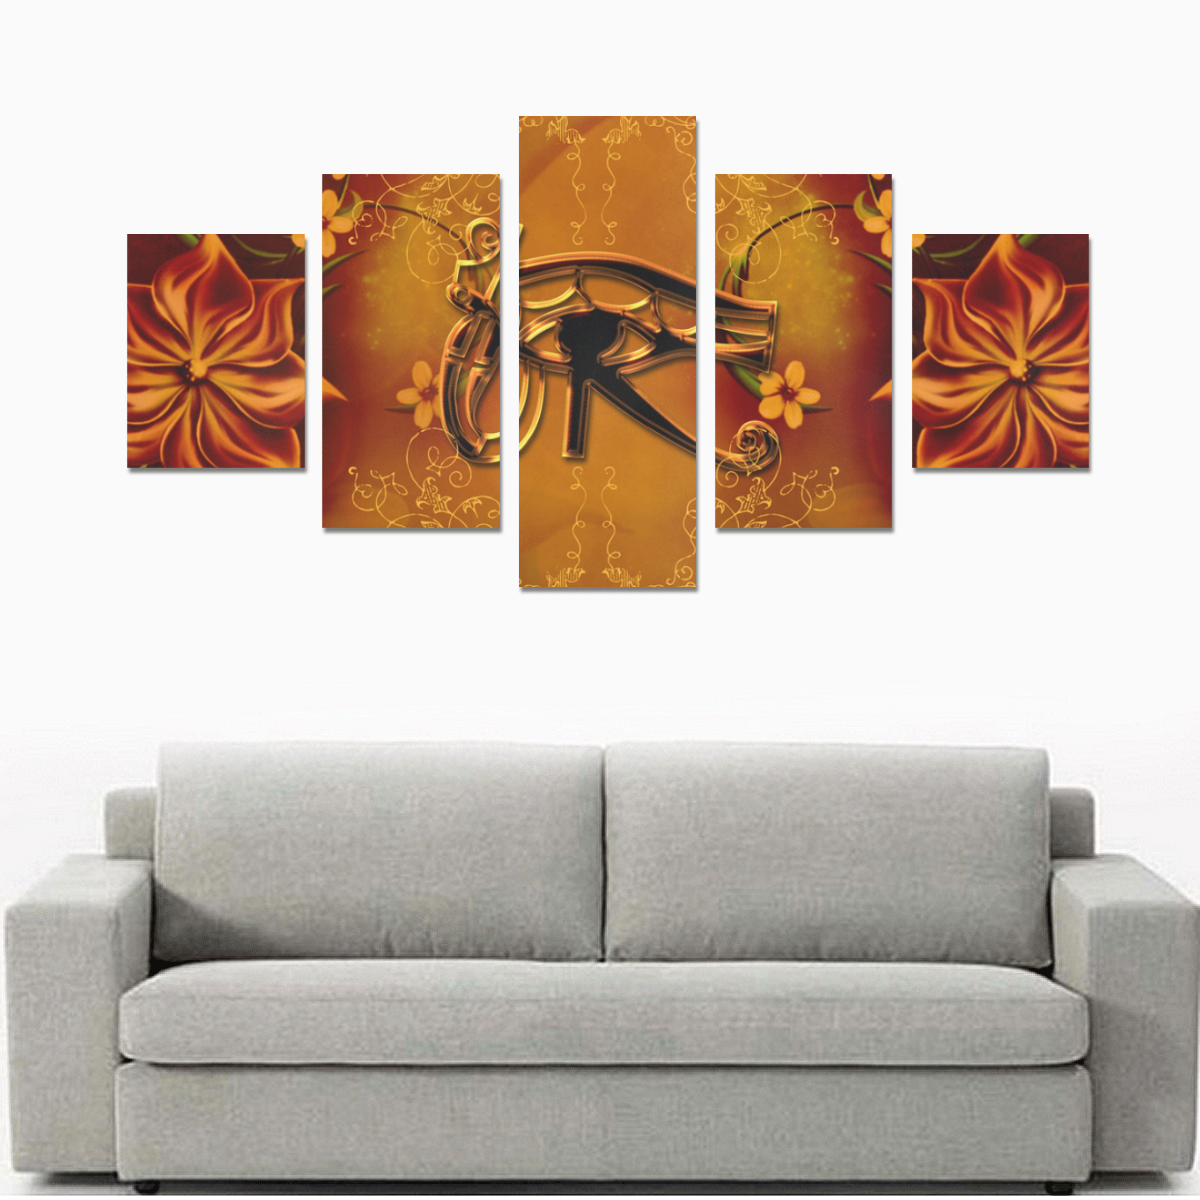 The all seeing eye Canvas Print Sets B (No Frame)